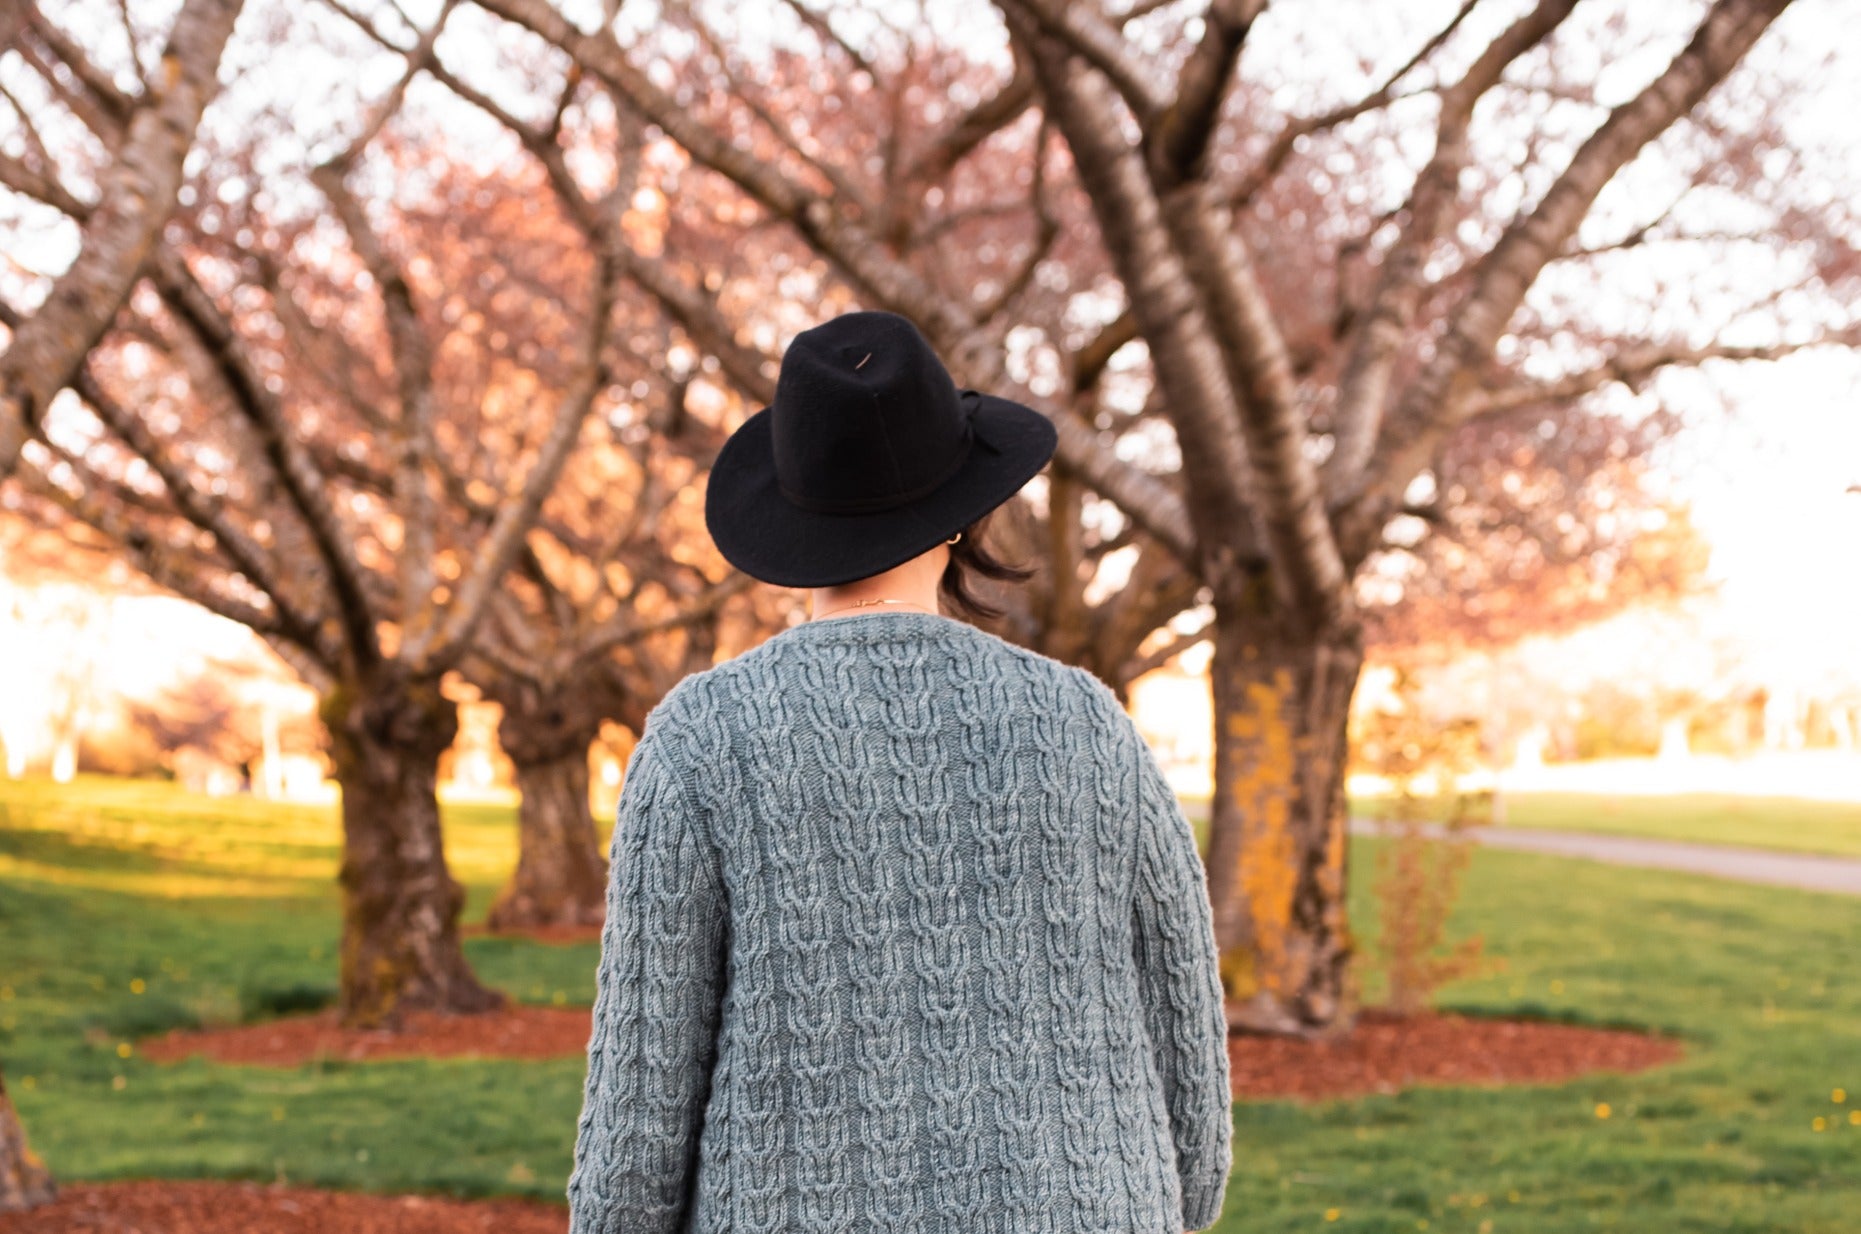 Seen from behind, Jen wears a black hat with a cable knit cardigan. A park with a grove of trees can be seen in the background.